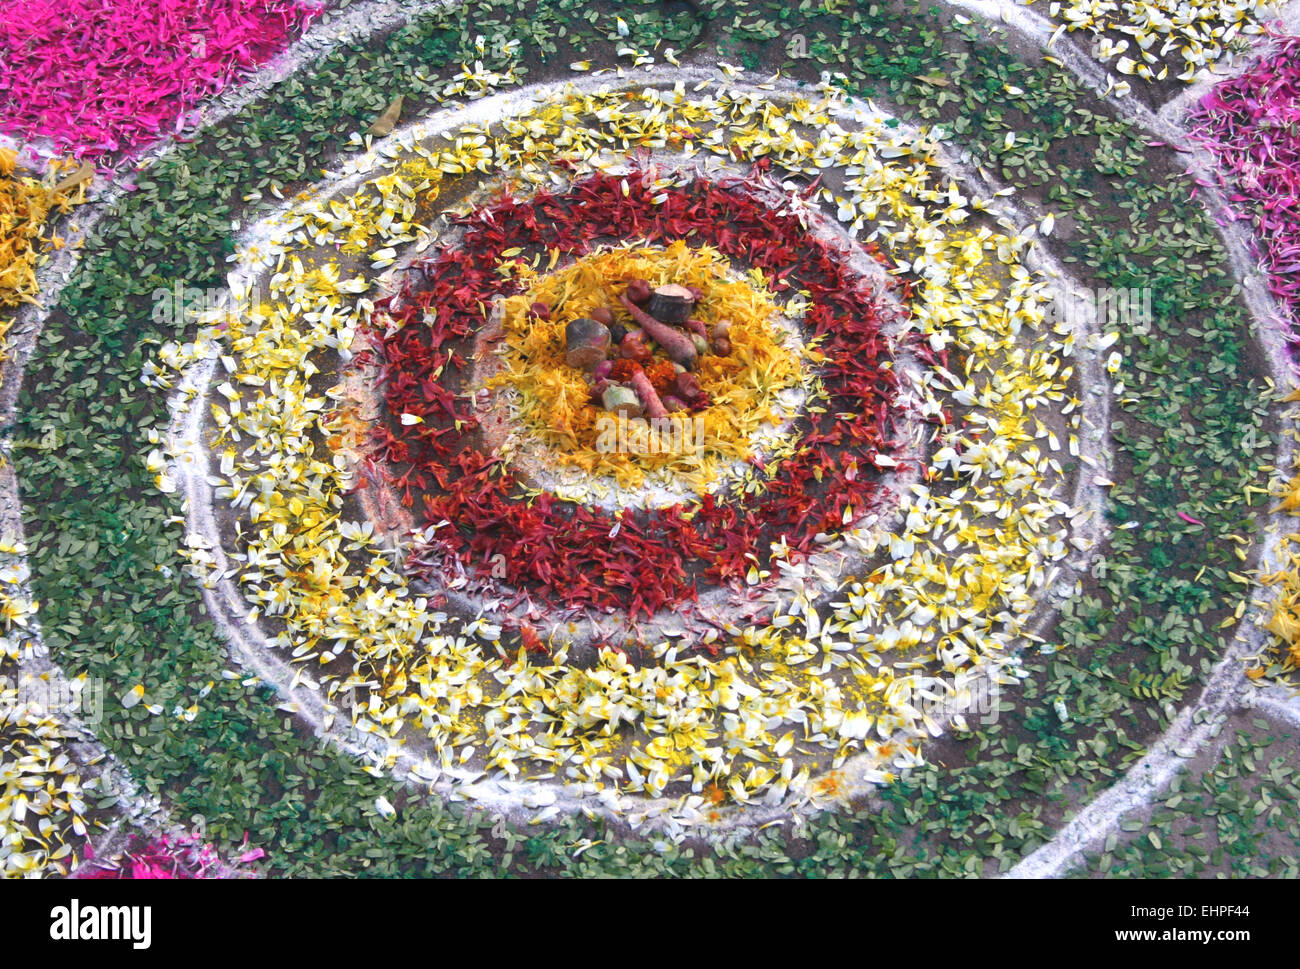 Colorful rangoli with flowers and cow dung .a folk art in india during festivals and ceremonies. Stock Photo